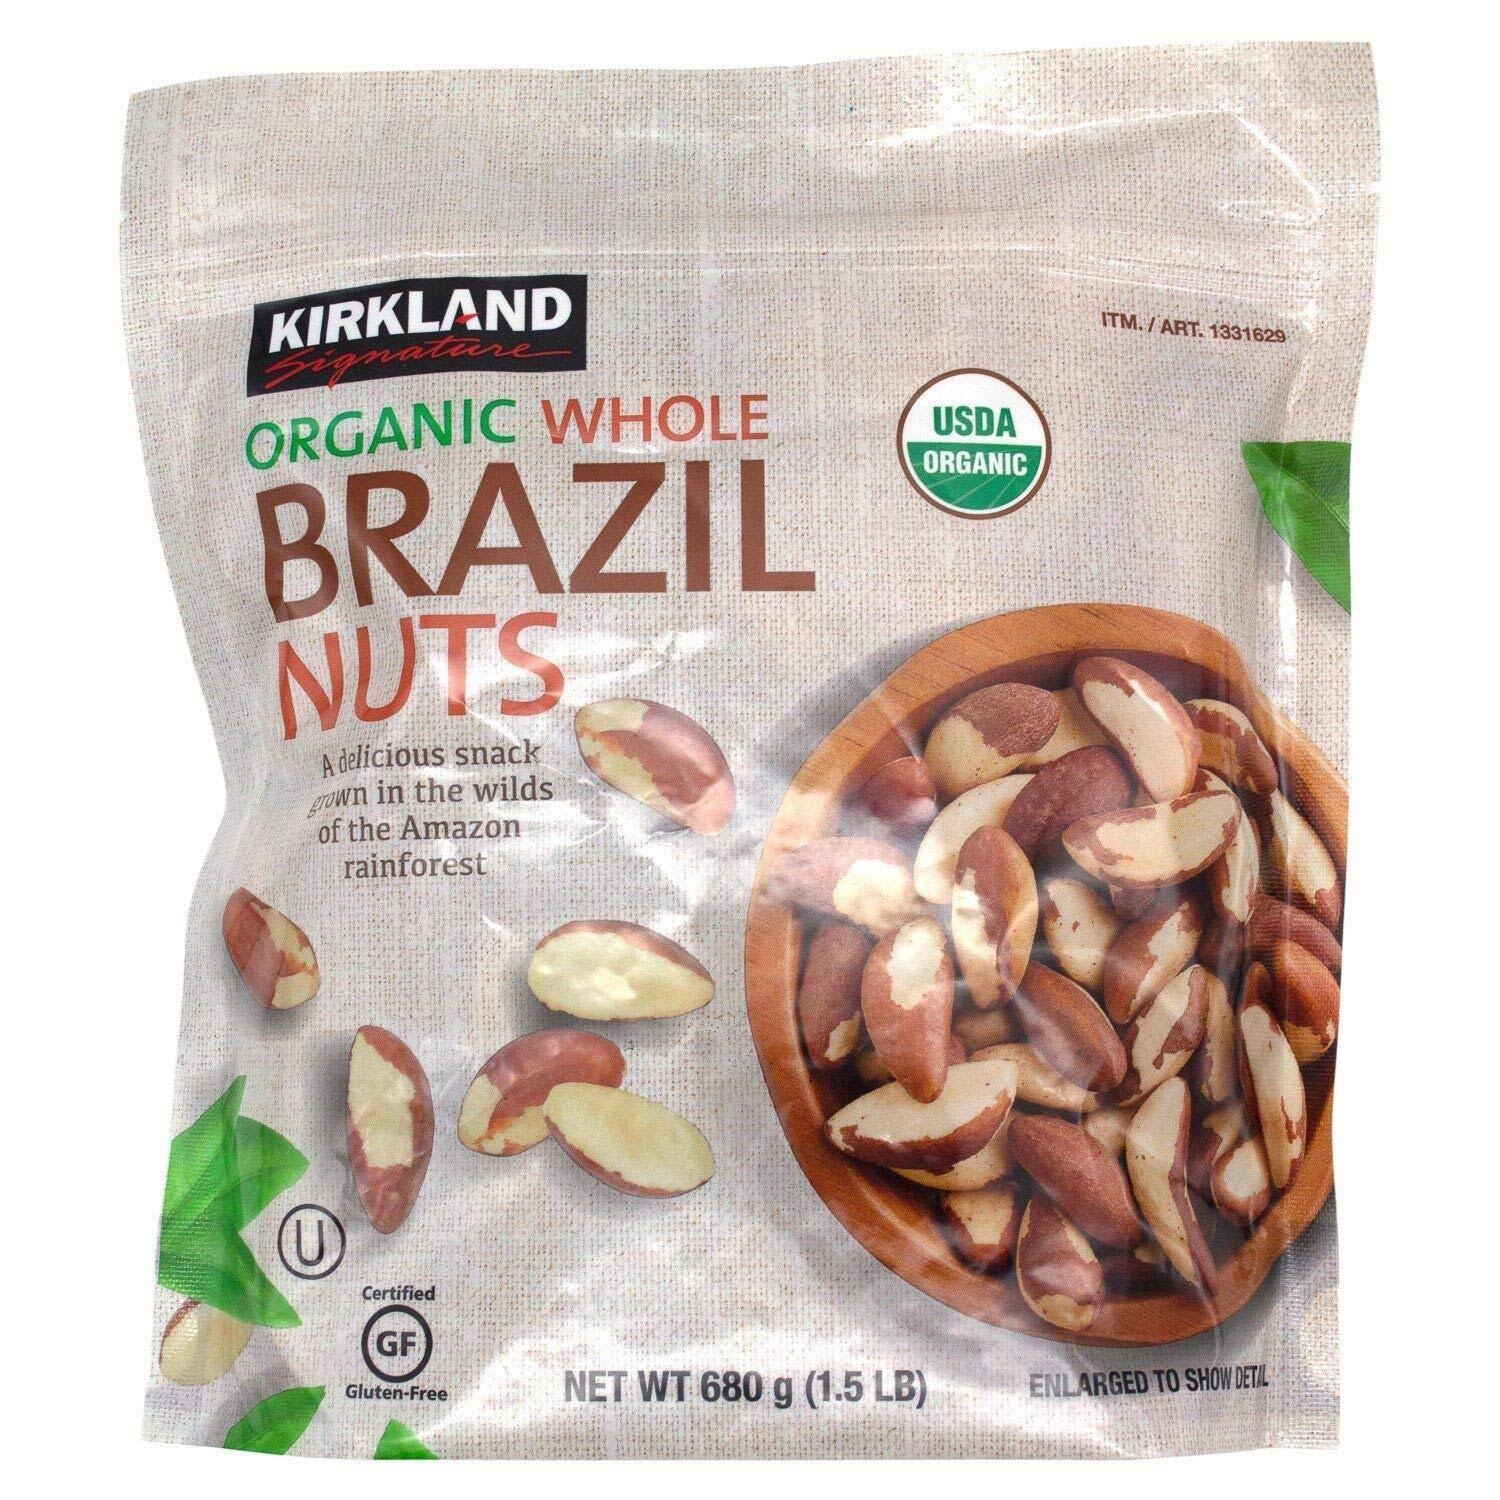 Certified Organic Whole Brazil Nuts 680g From The Amazon Rainforest Vegan